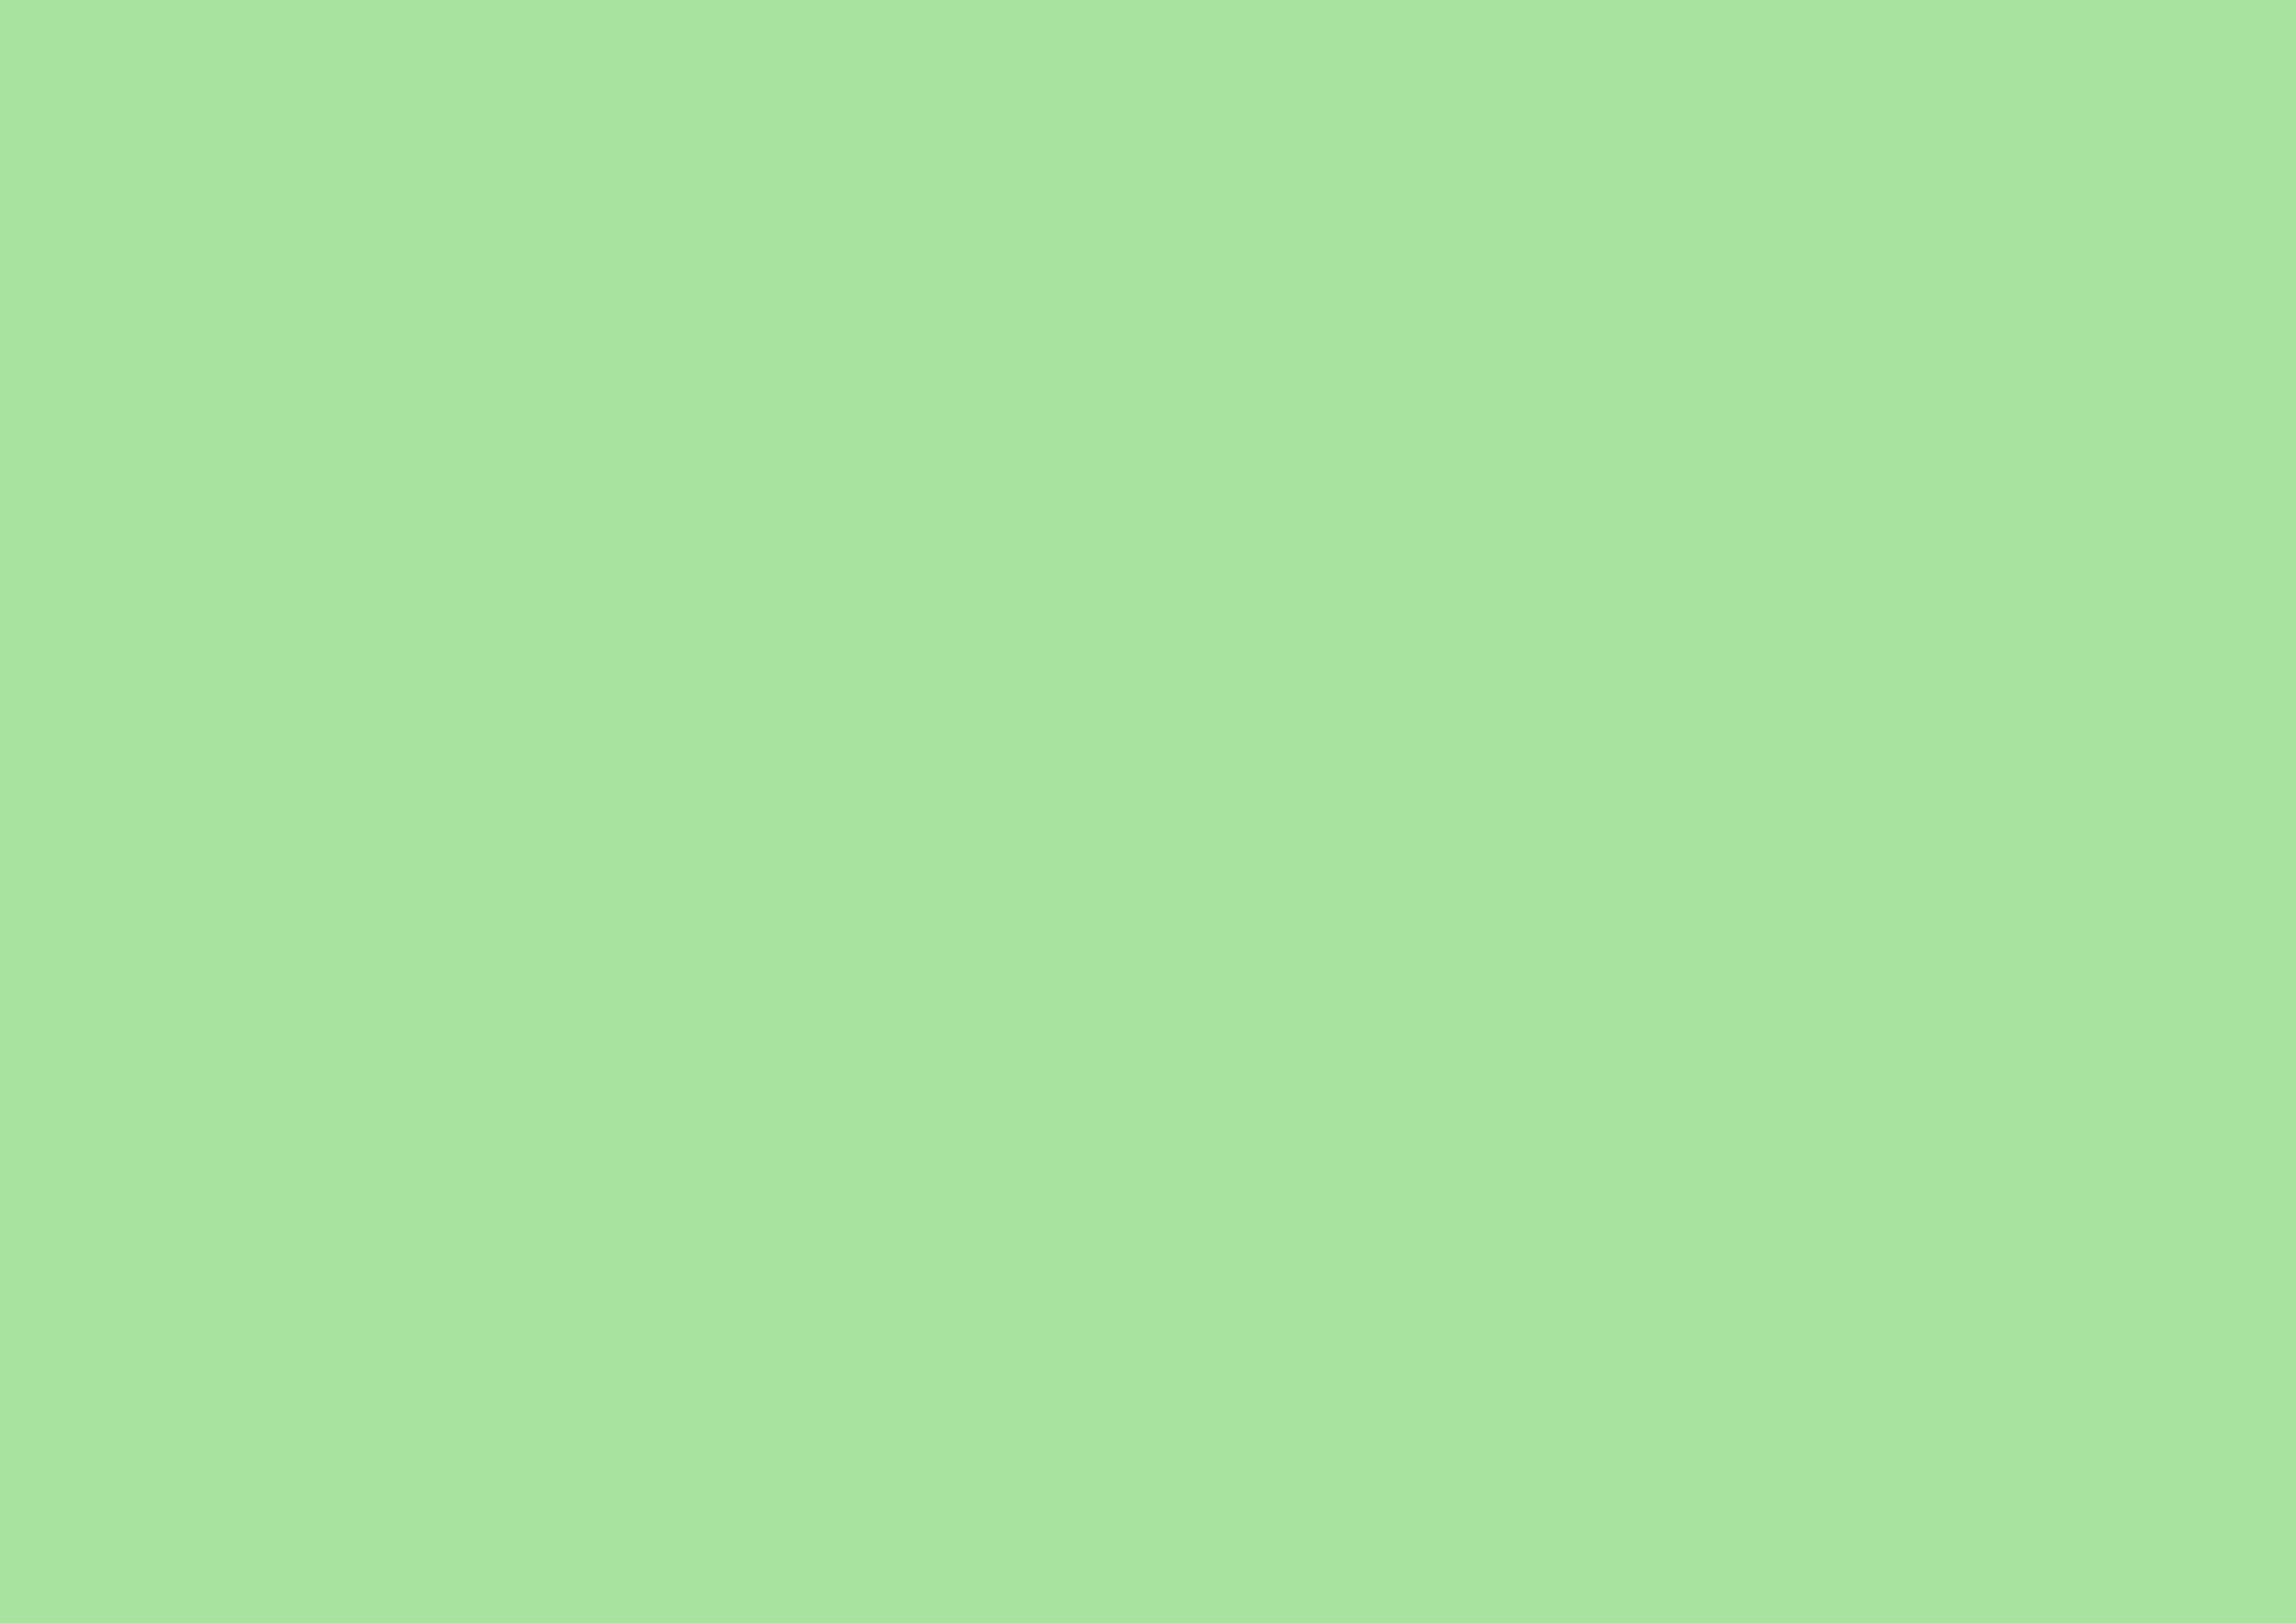 3508x2480 Granny Smith Apple Solid Color Background